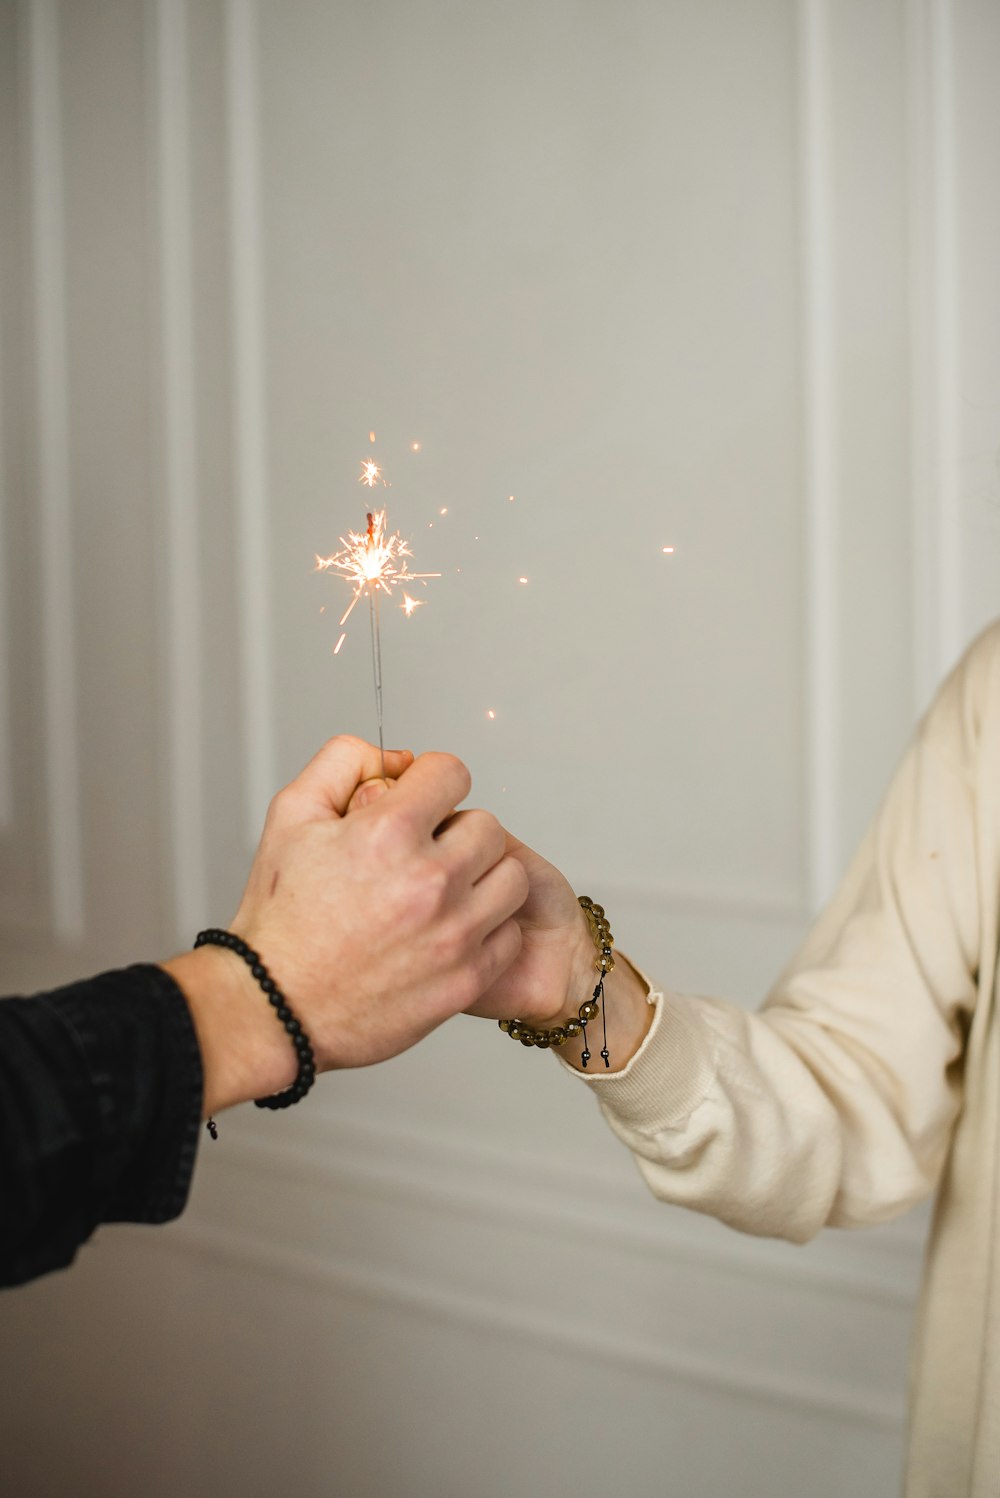 person holding lighted sparkler in front of white curtain